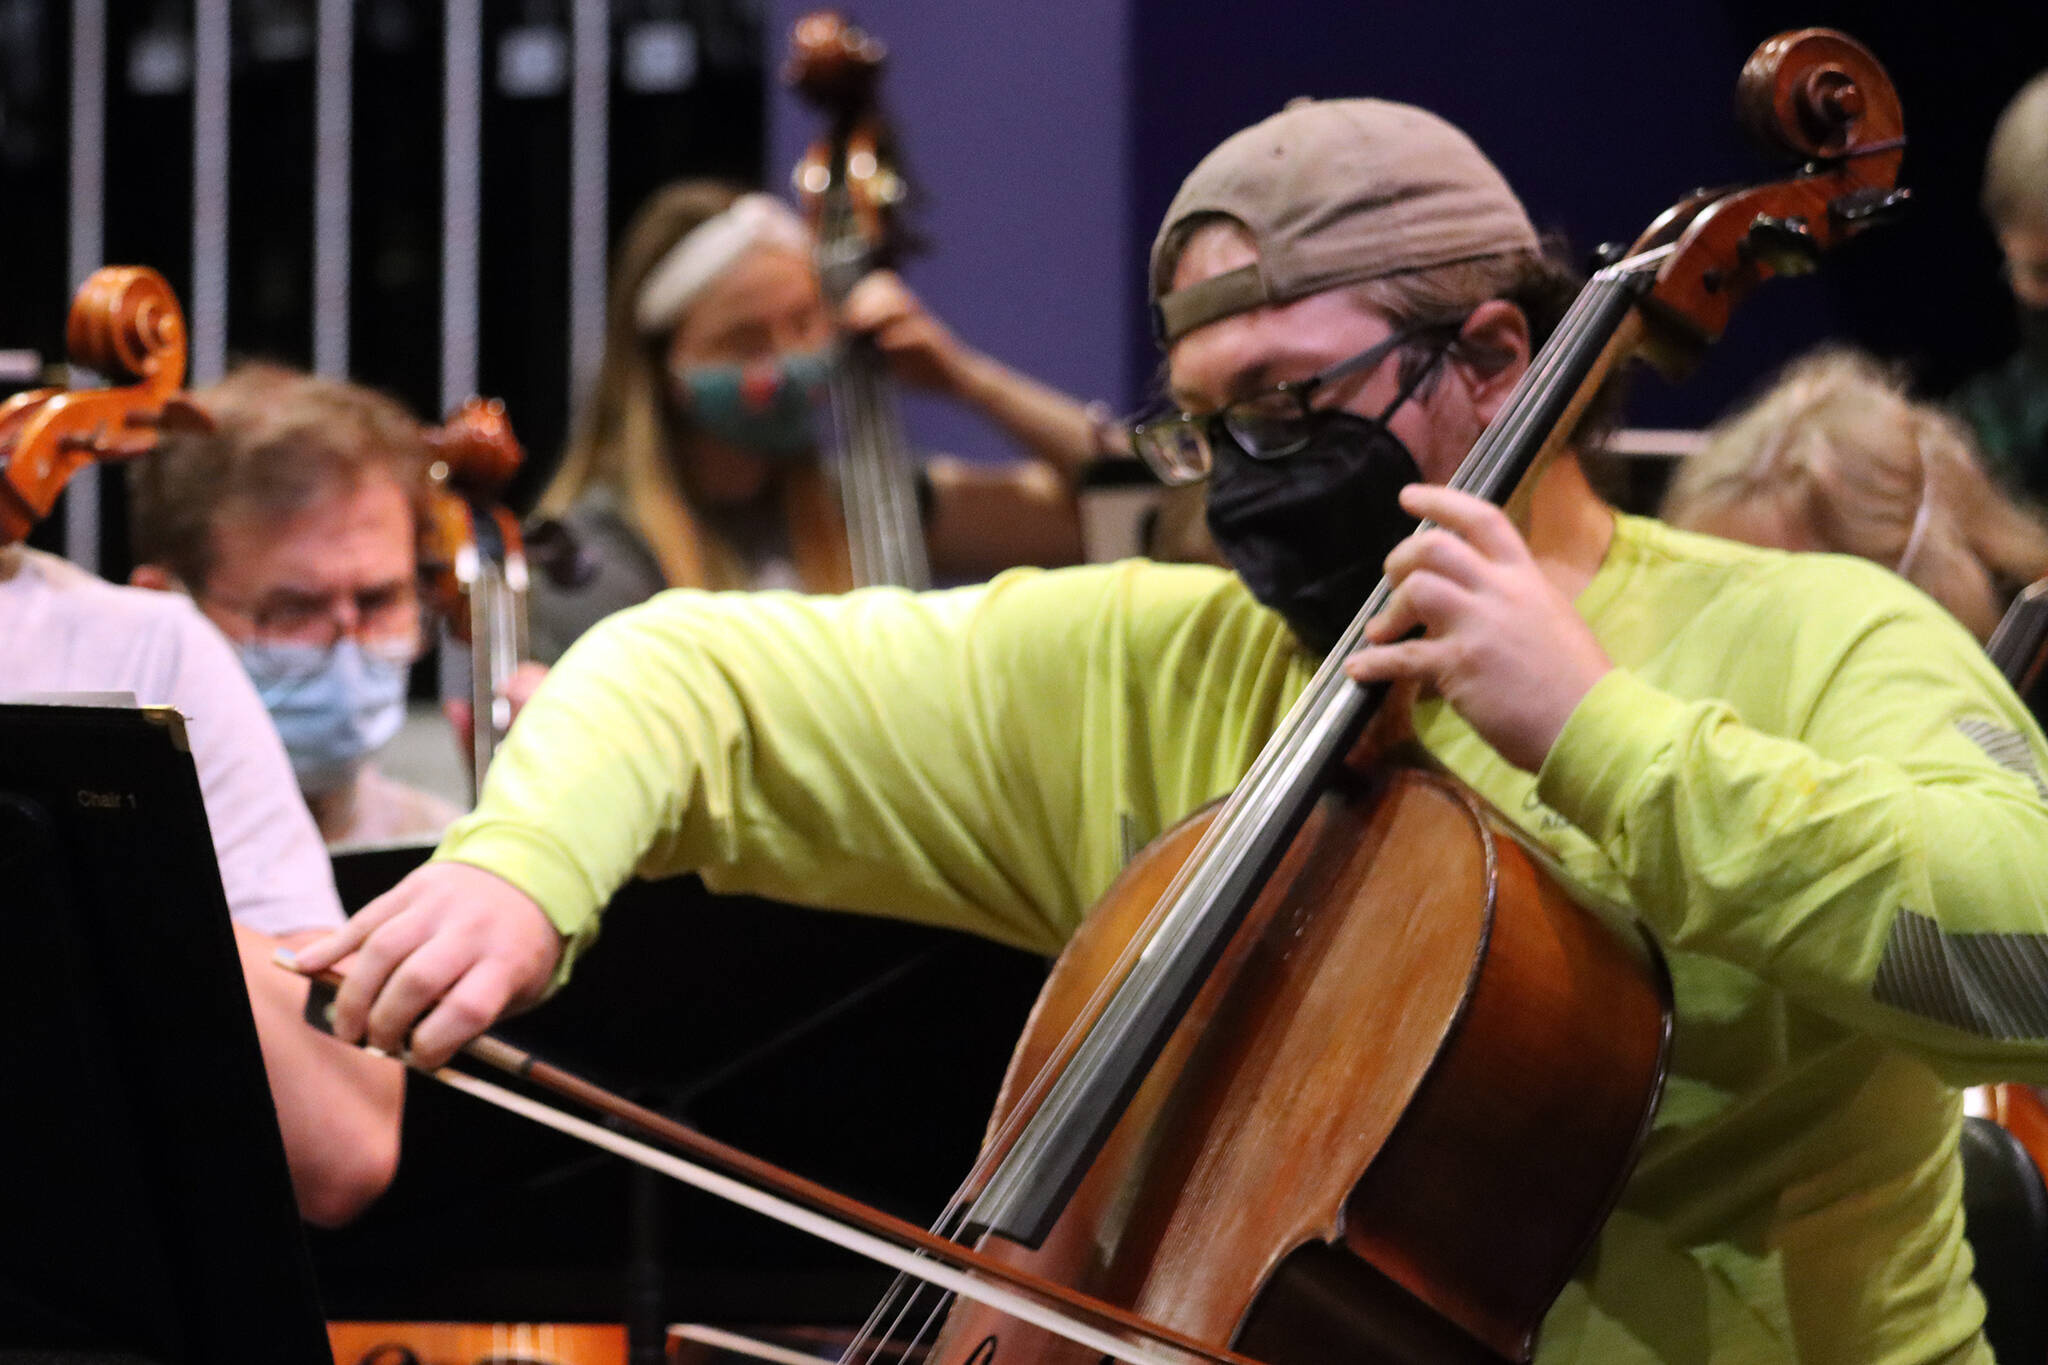 Ben Holtz plays a cello as the Juneau Symphony prepares for this weekend’s concert.